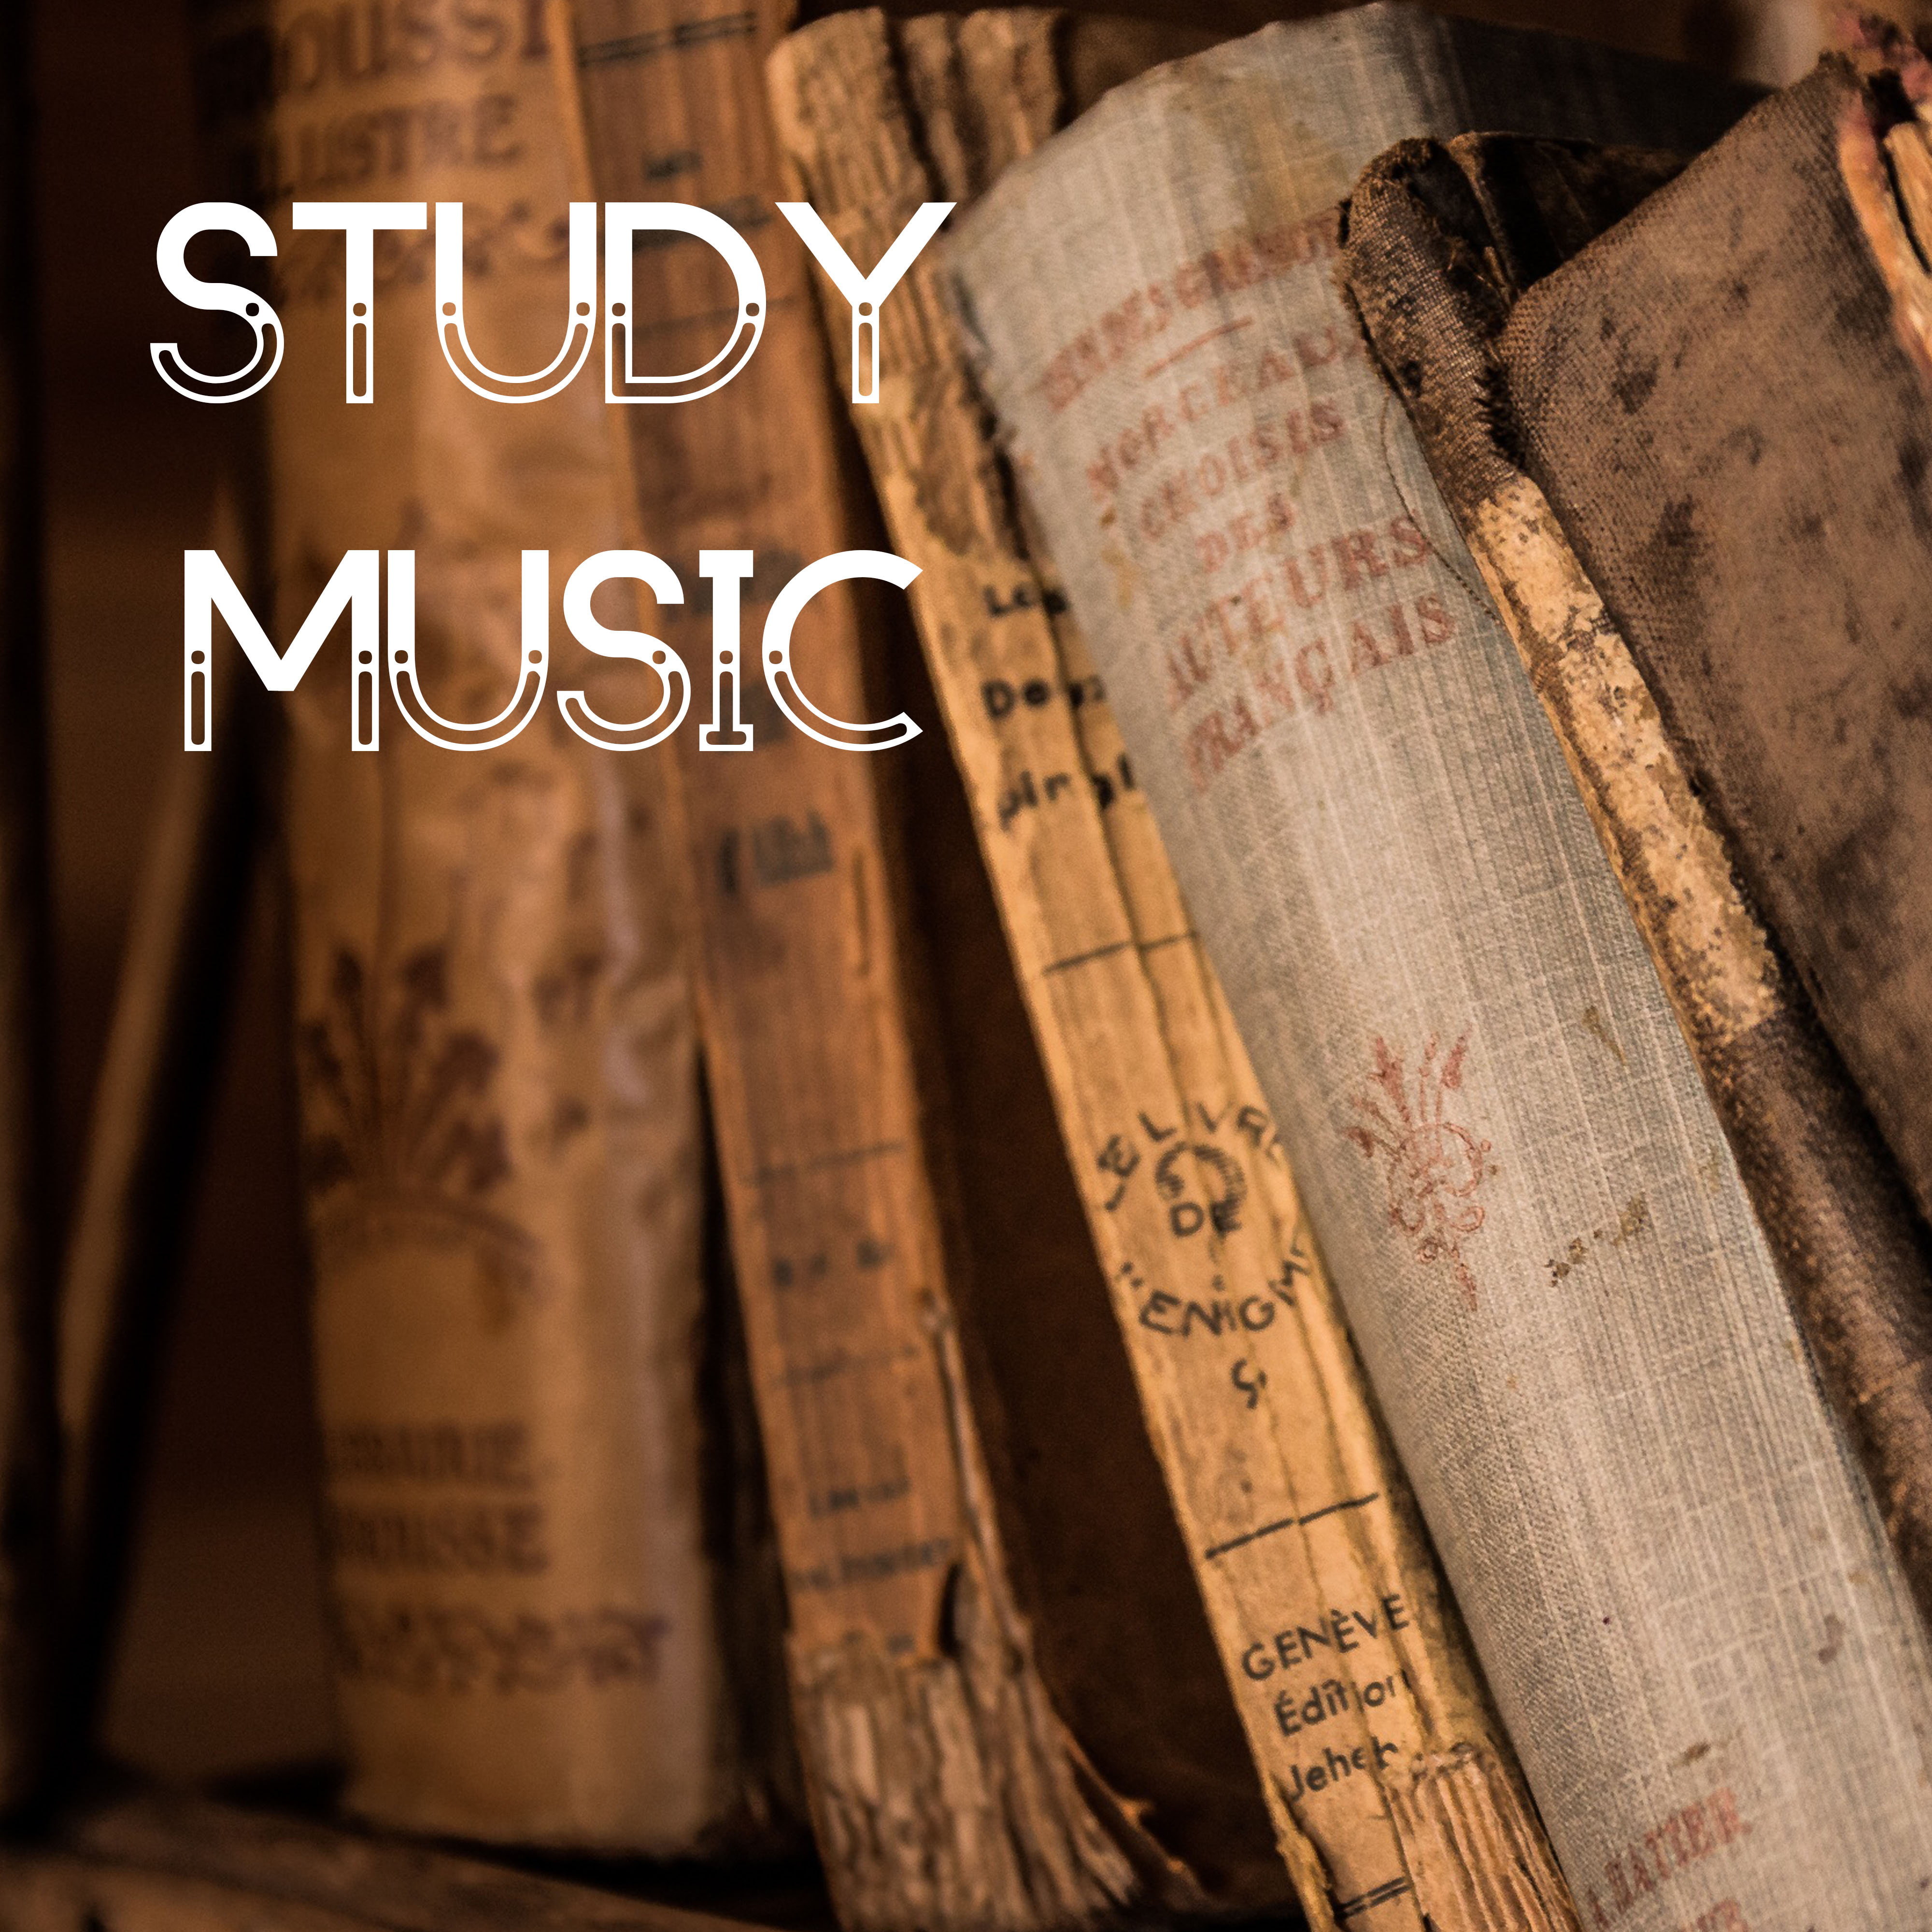 Study Music Collection - Studying Backrground Ambient